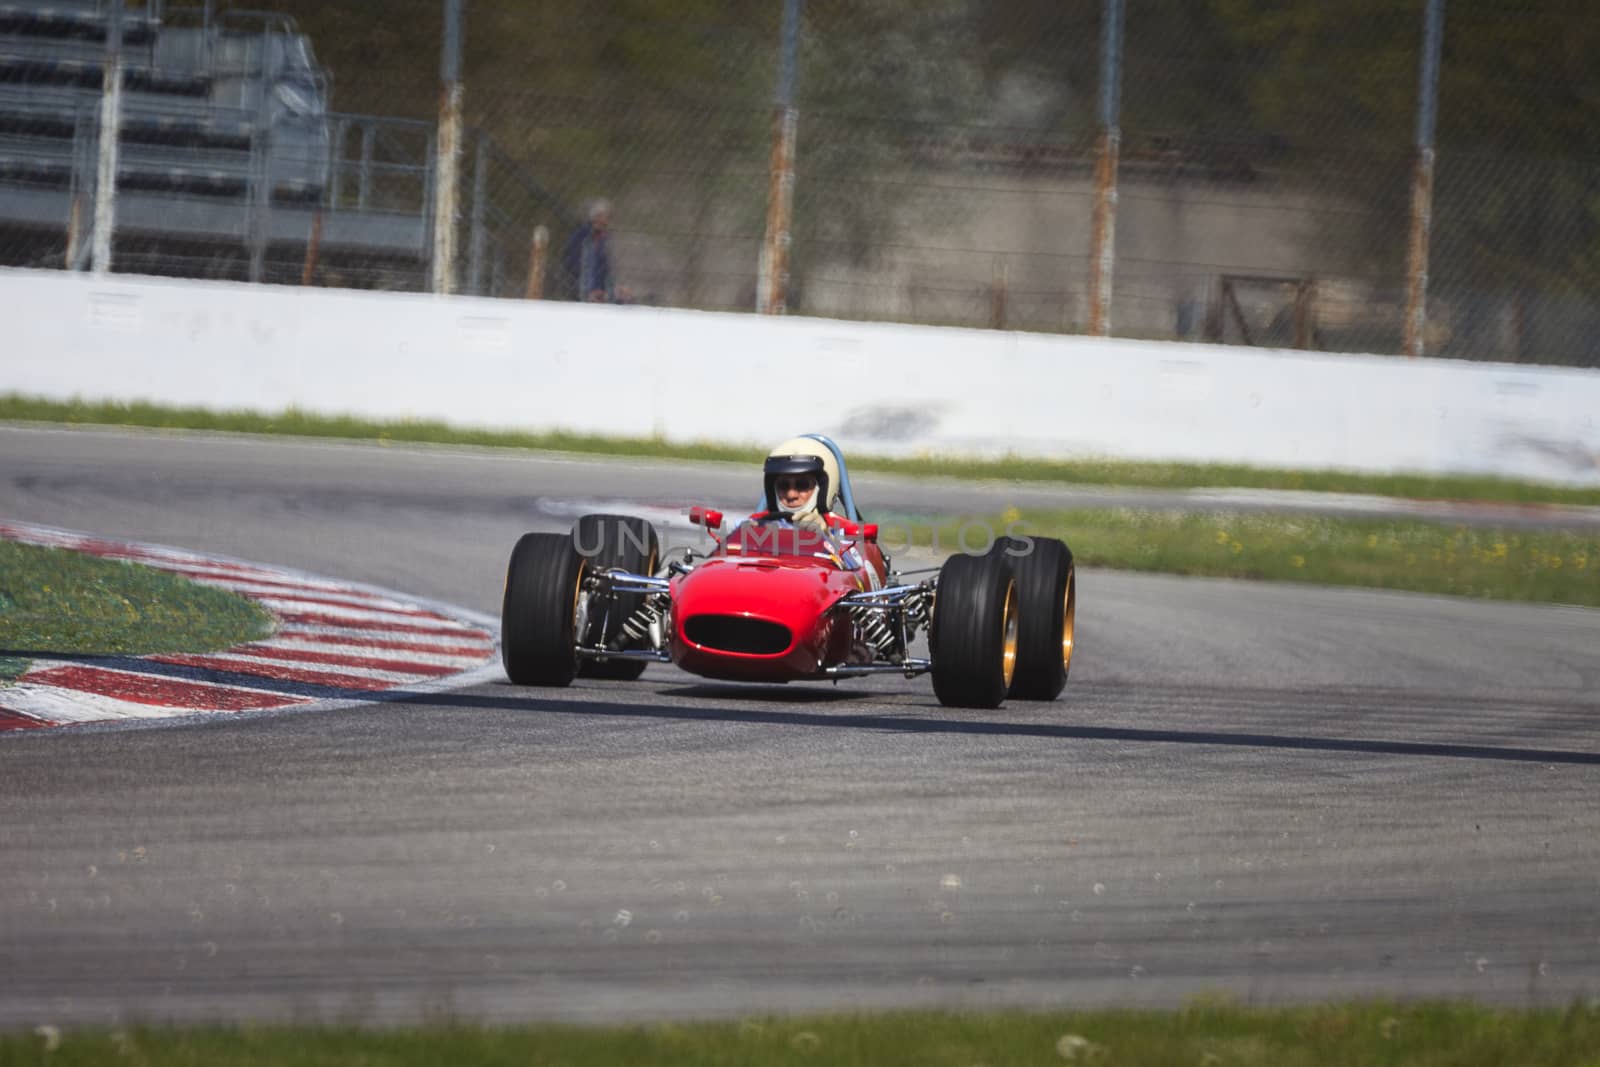 A red racing car running in the circuit of Monza, Italy